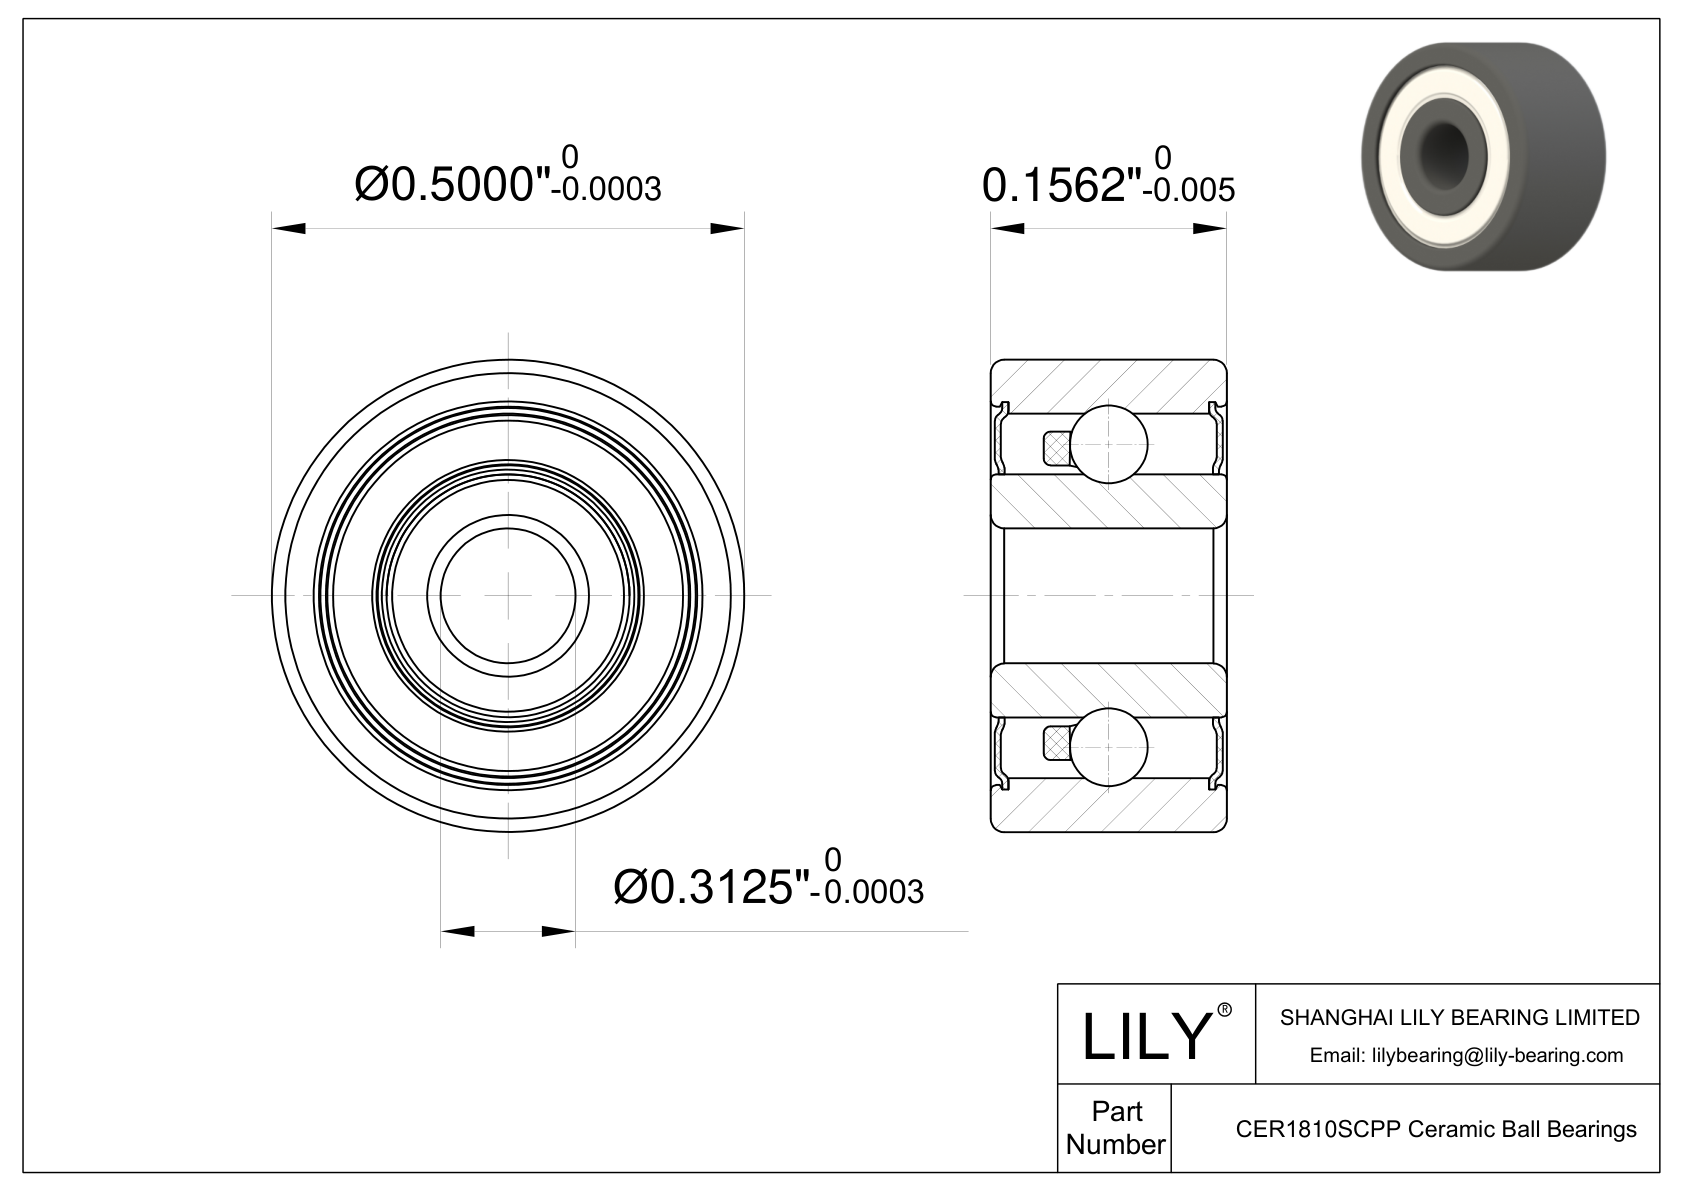 CESC R1810 2RS Inch Size Silicon Carbide Ceramic Bearings cad drawing